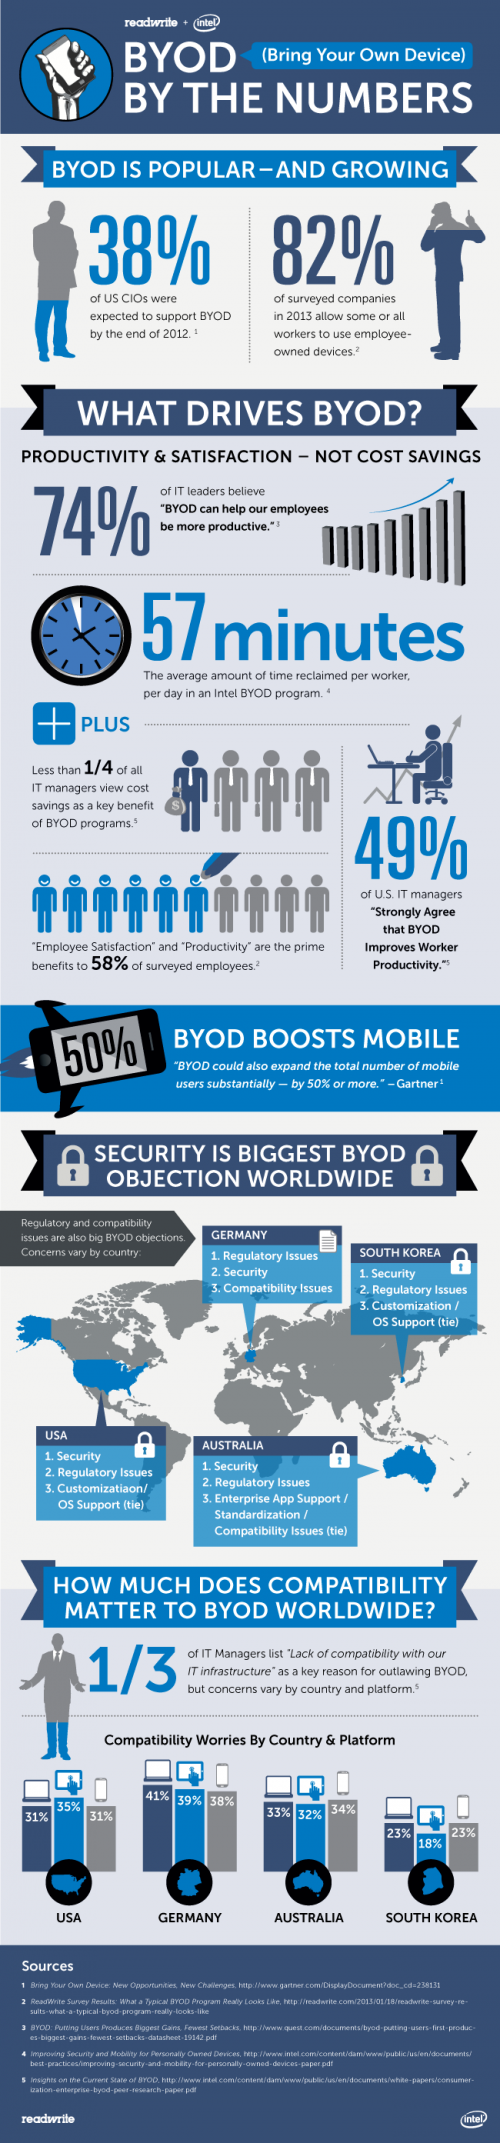 Infographic: BYOD By the Numbers - By Igor Beuker for ViralBlog.com 